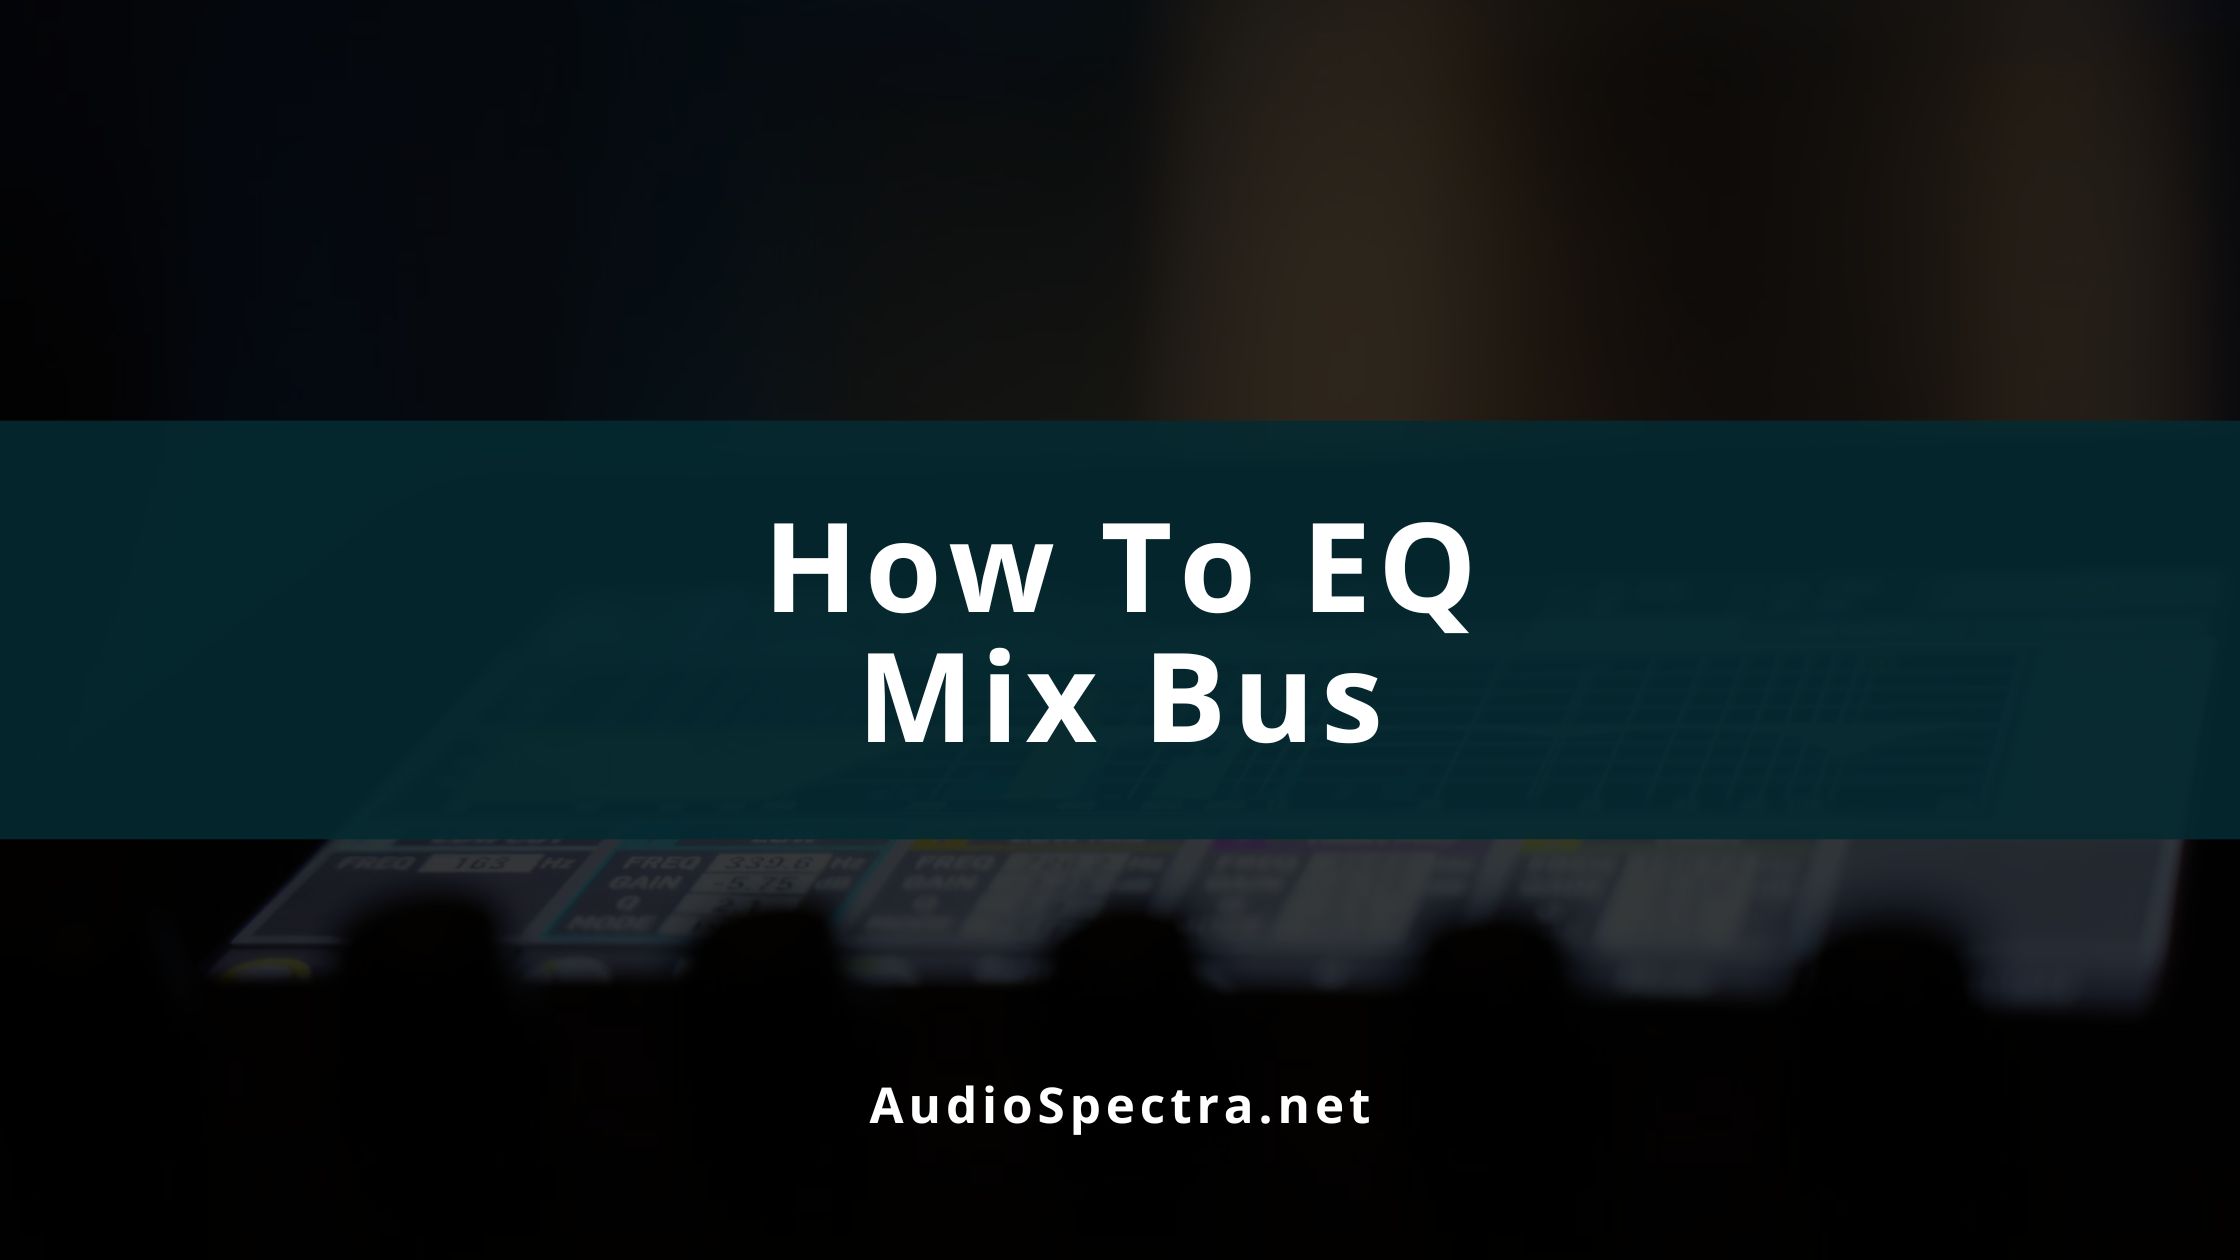 How To EQ Mix Bus